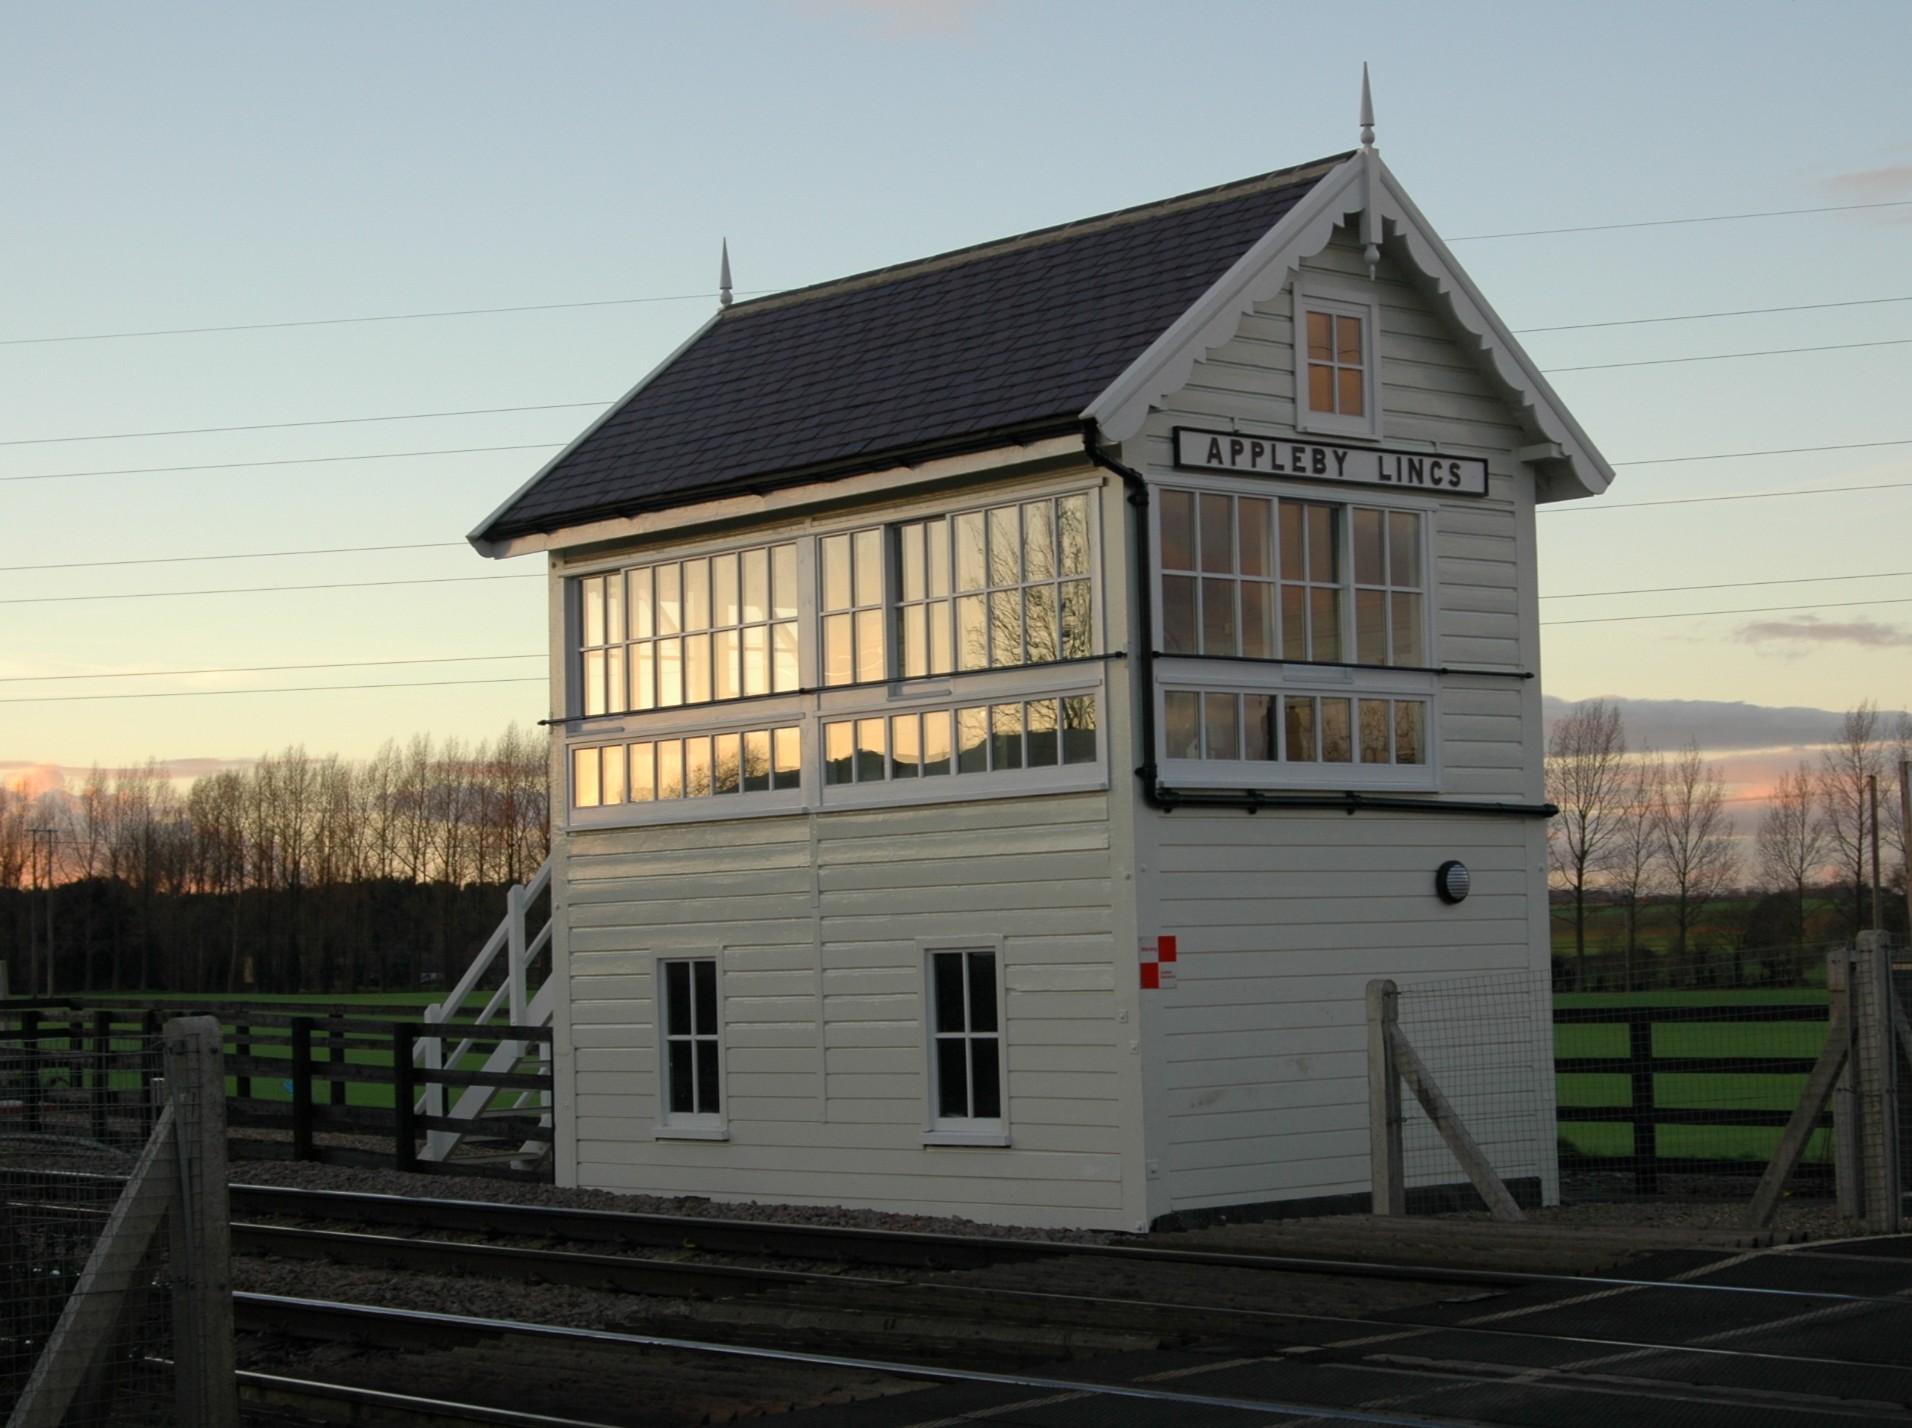 Appleby Signal Box and Station